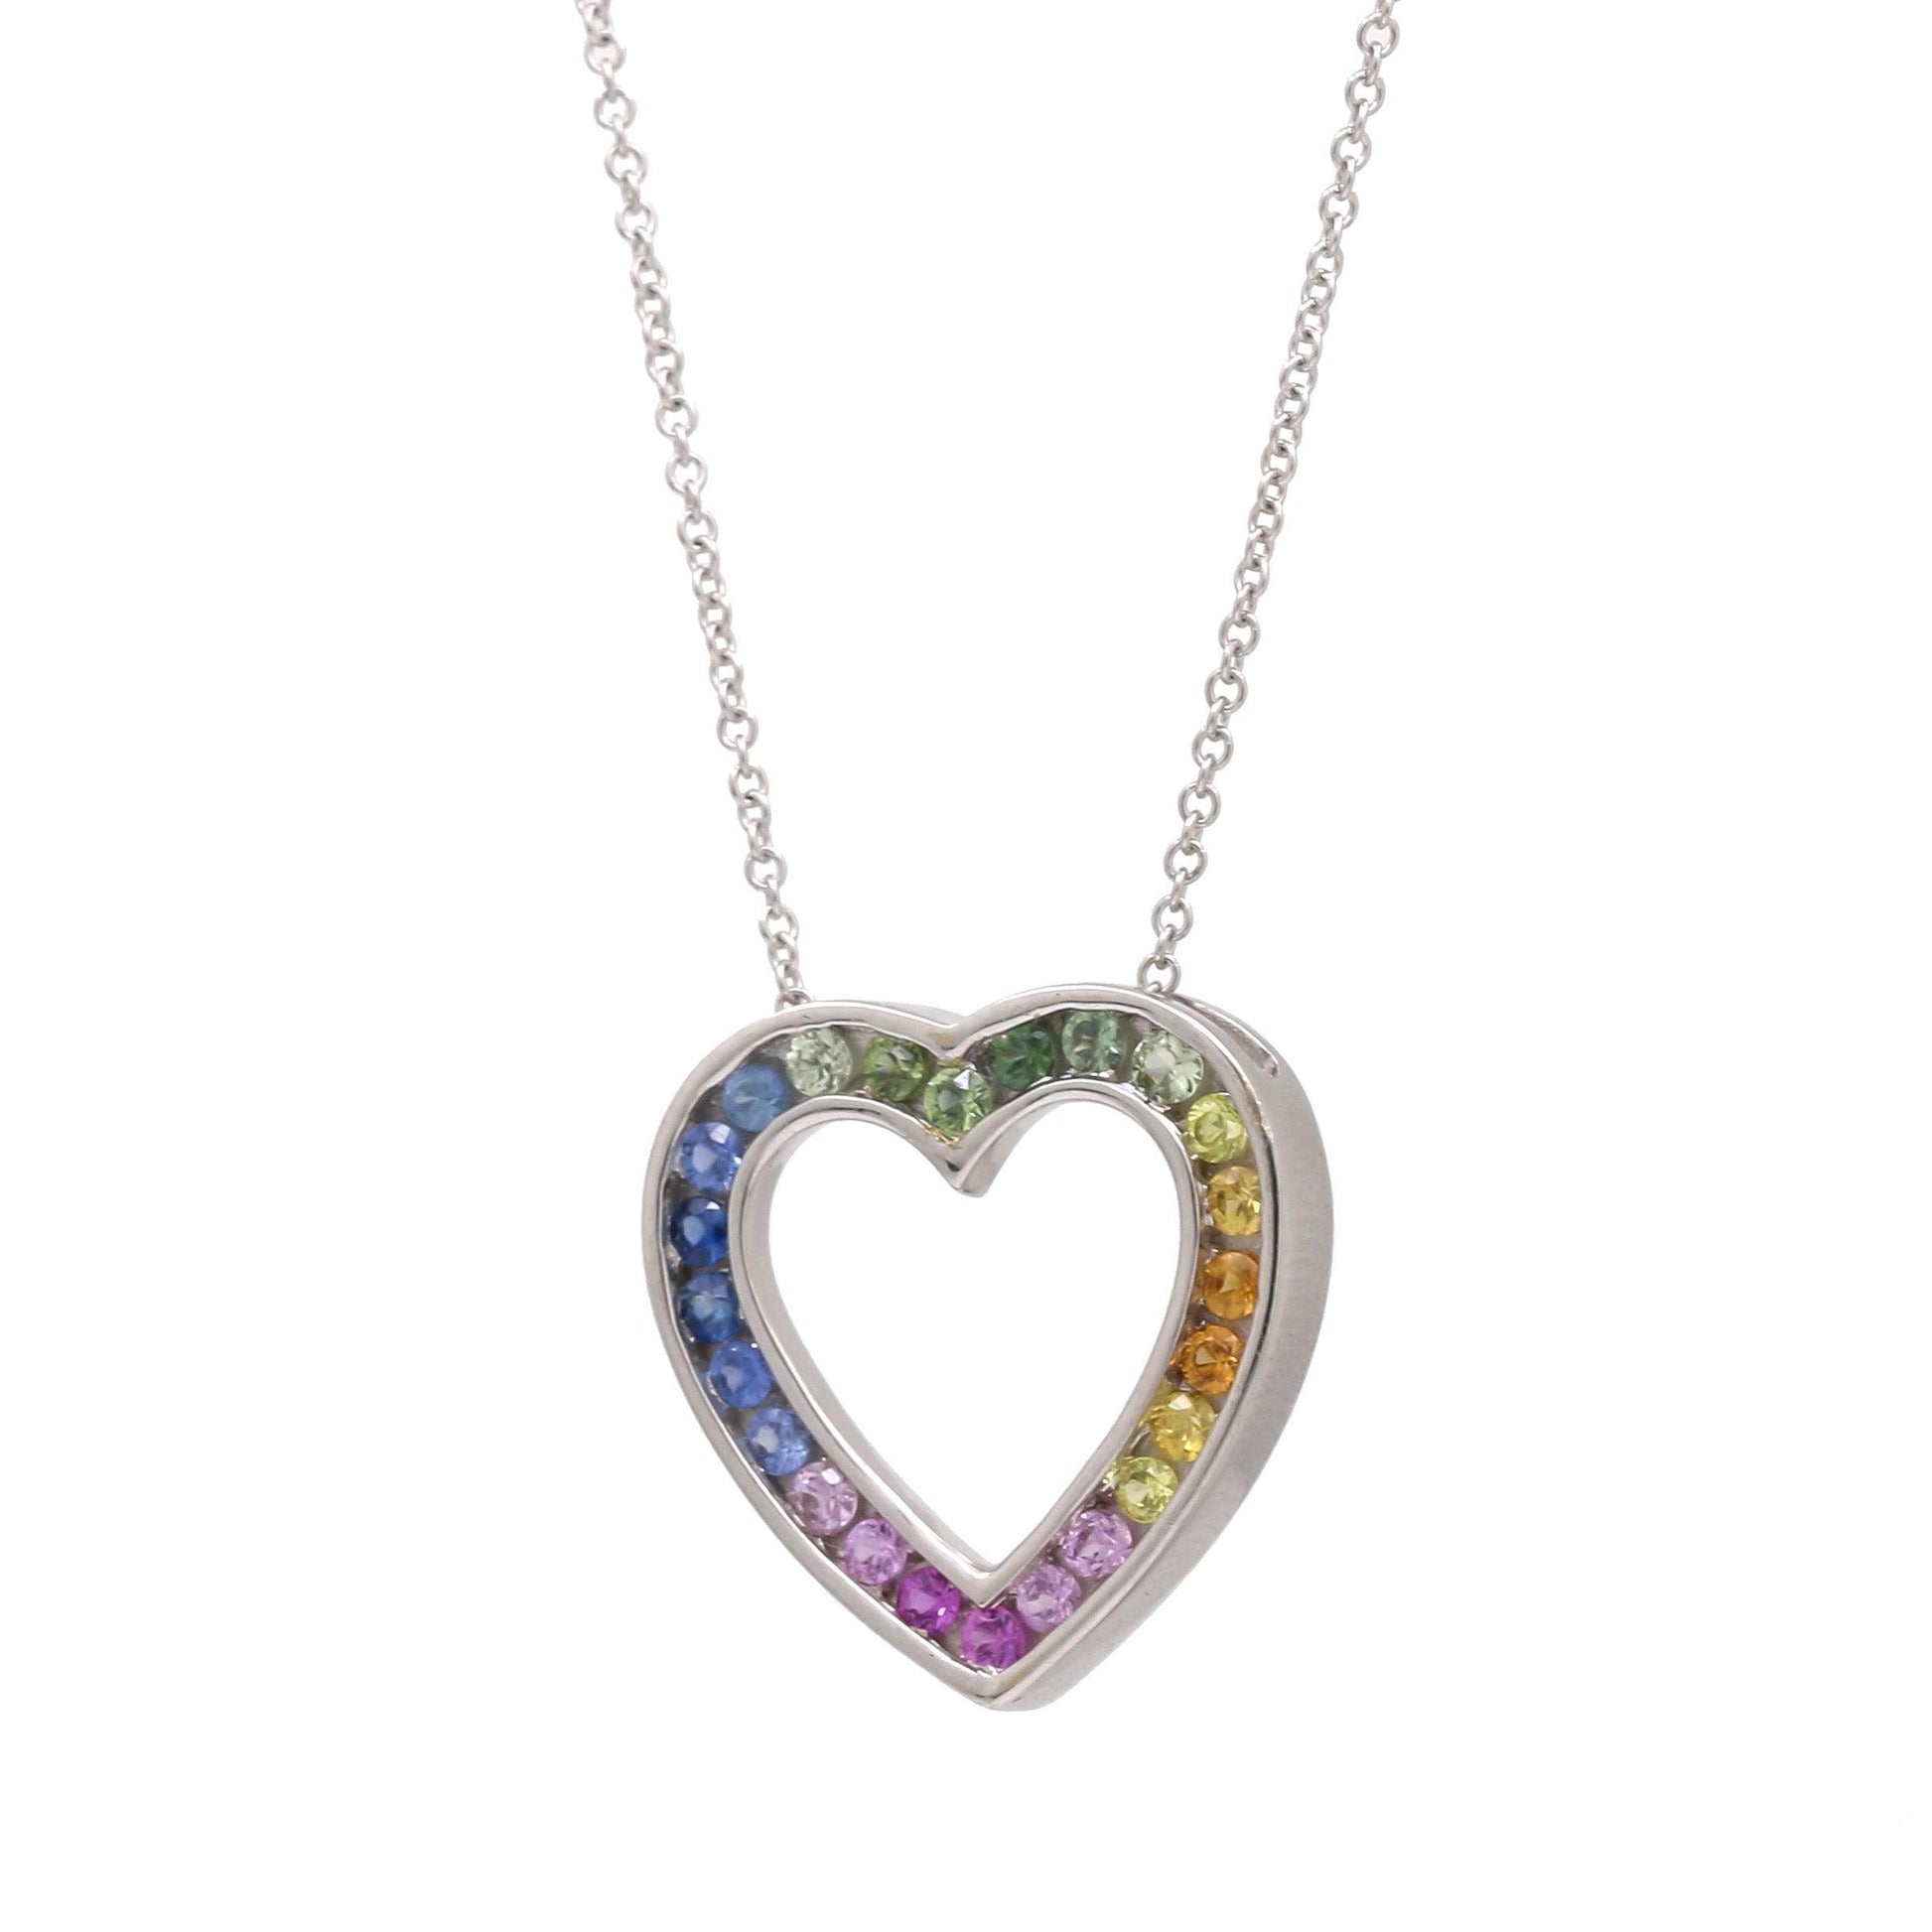 Women's Rainbow Sapphire Heart Pendant Necklace in 14k White Gold - 31 Jewels Inc.